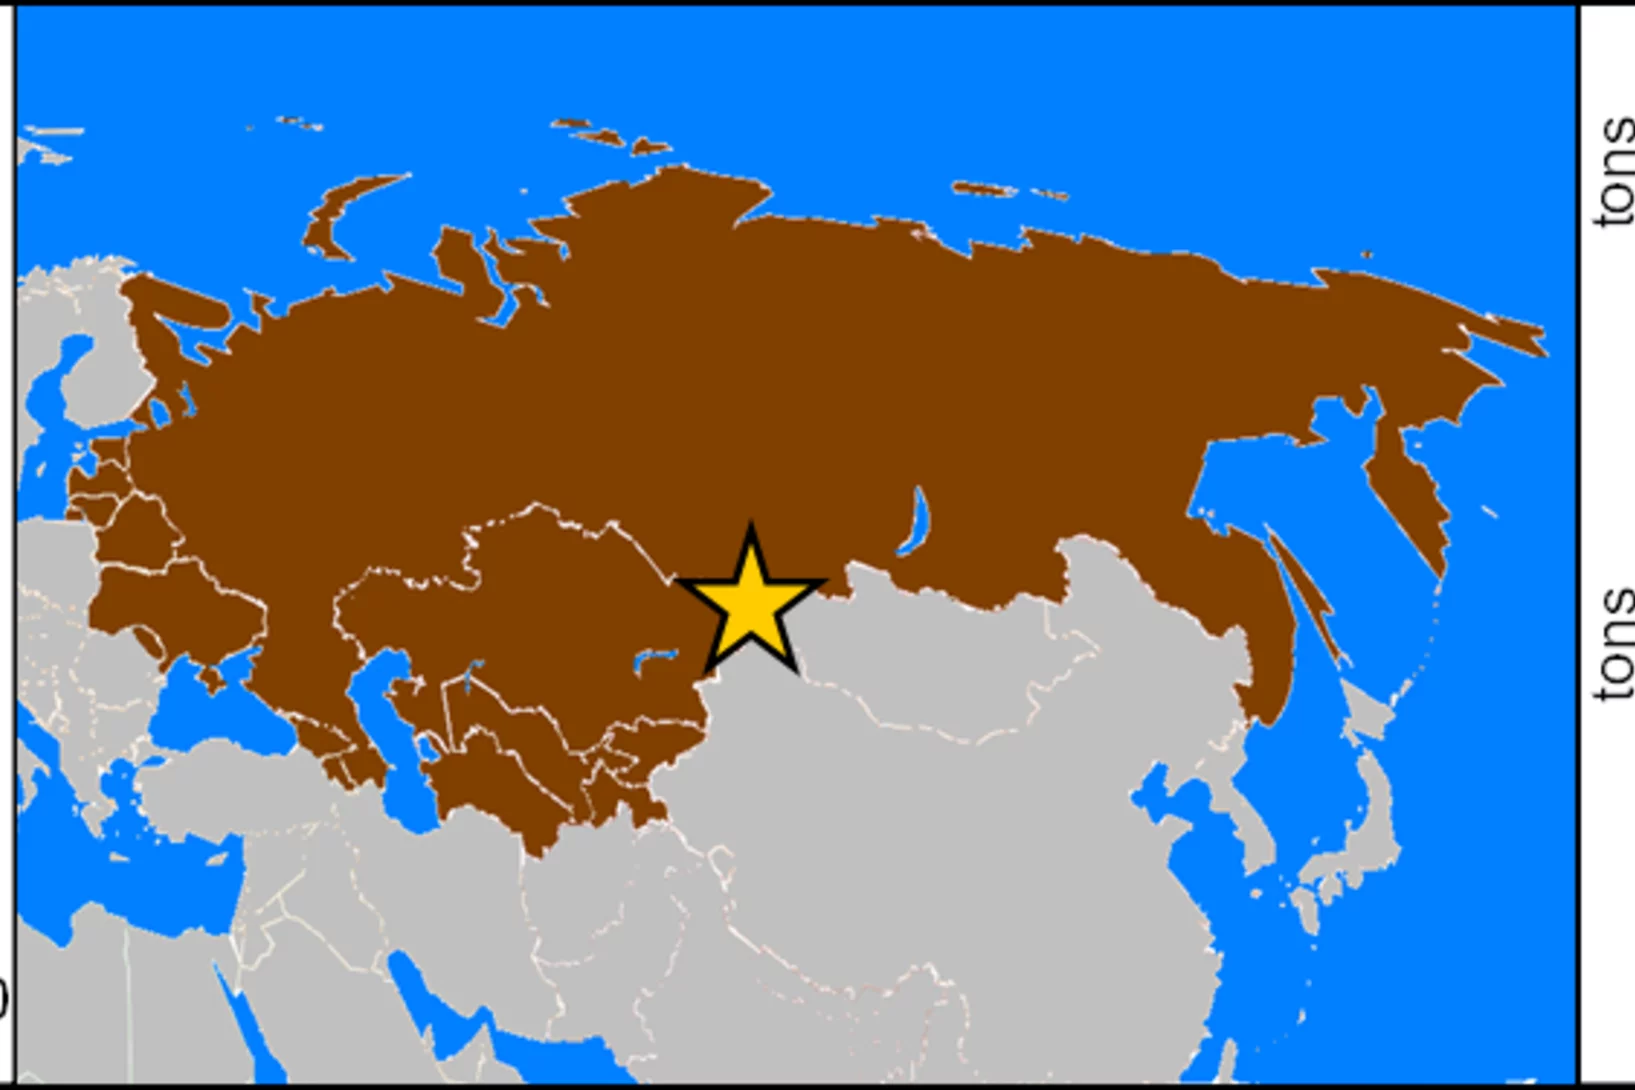 Estimated historical heavy metal (Cd, Cu, Sb, and Zn) emissions  from the territory of the former Soviet Union during the period 1935-1991 based on ice-core records from Belukha glacier in the Siberian Altai (star).